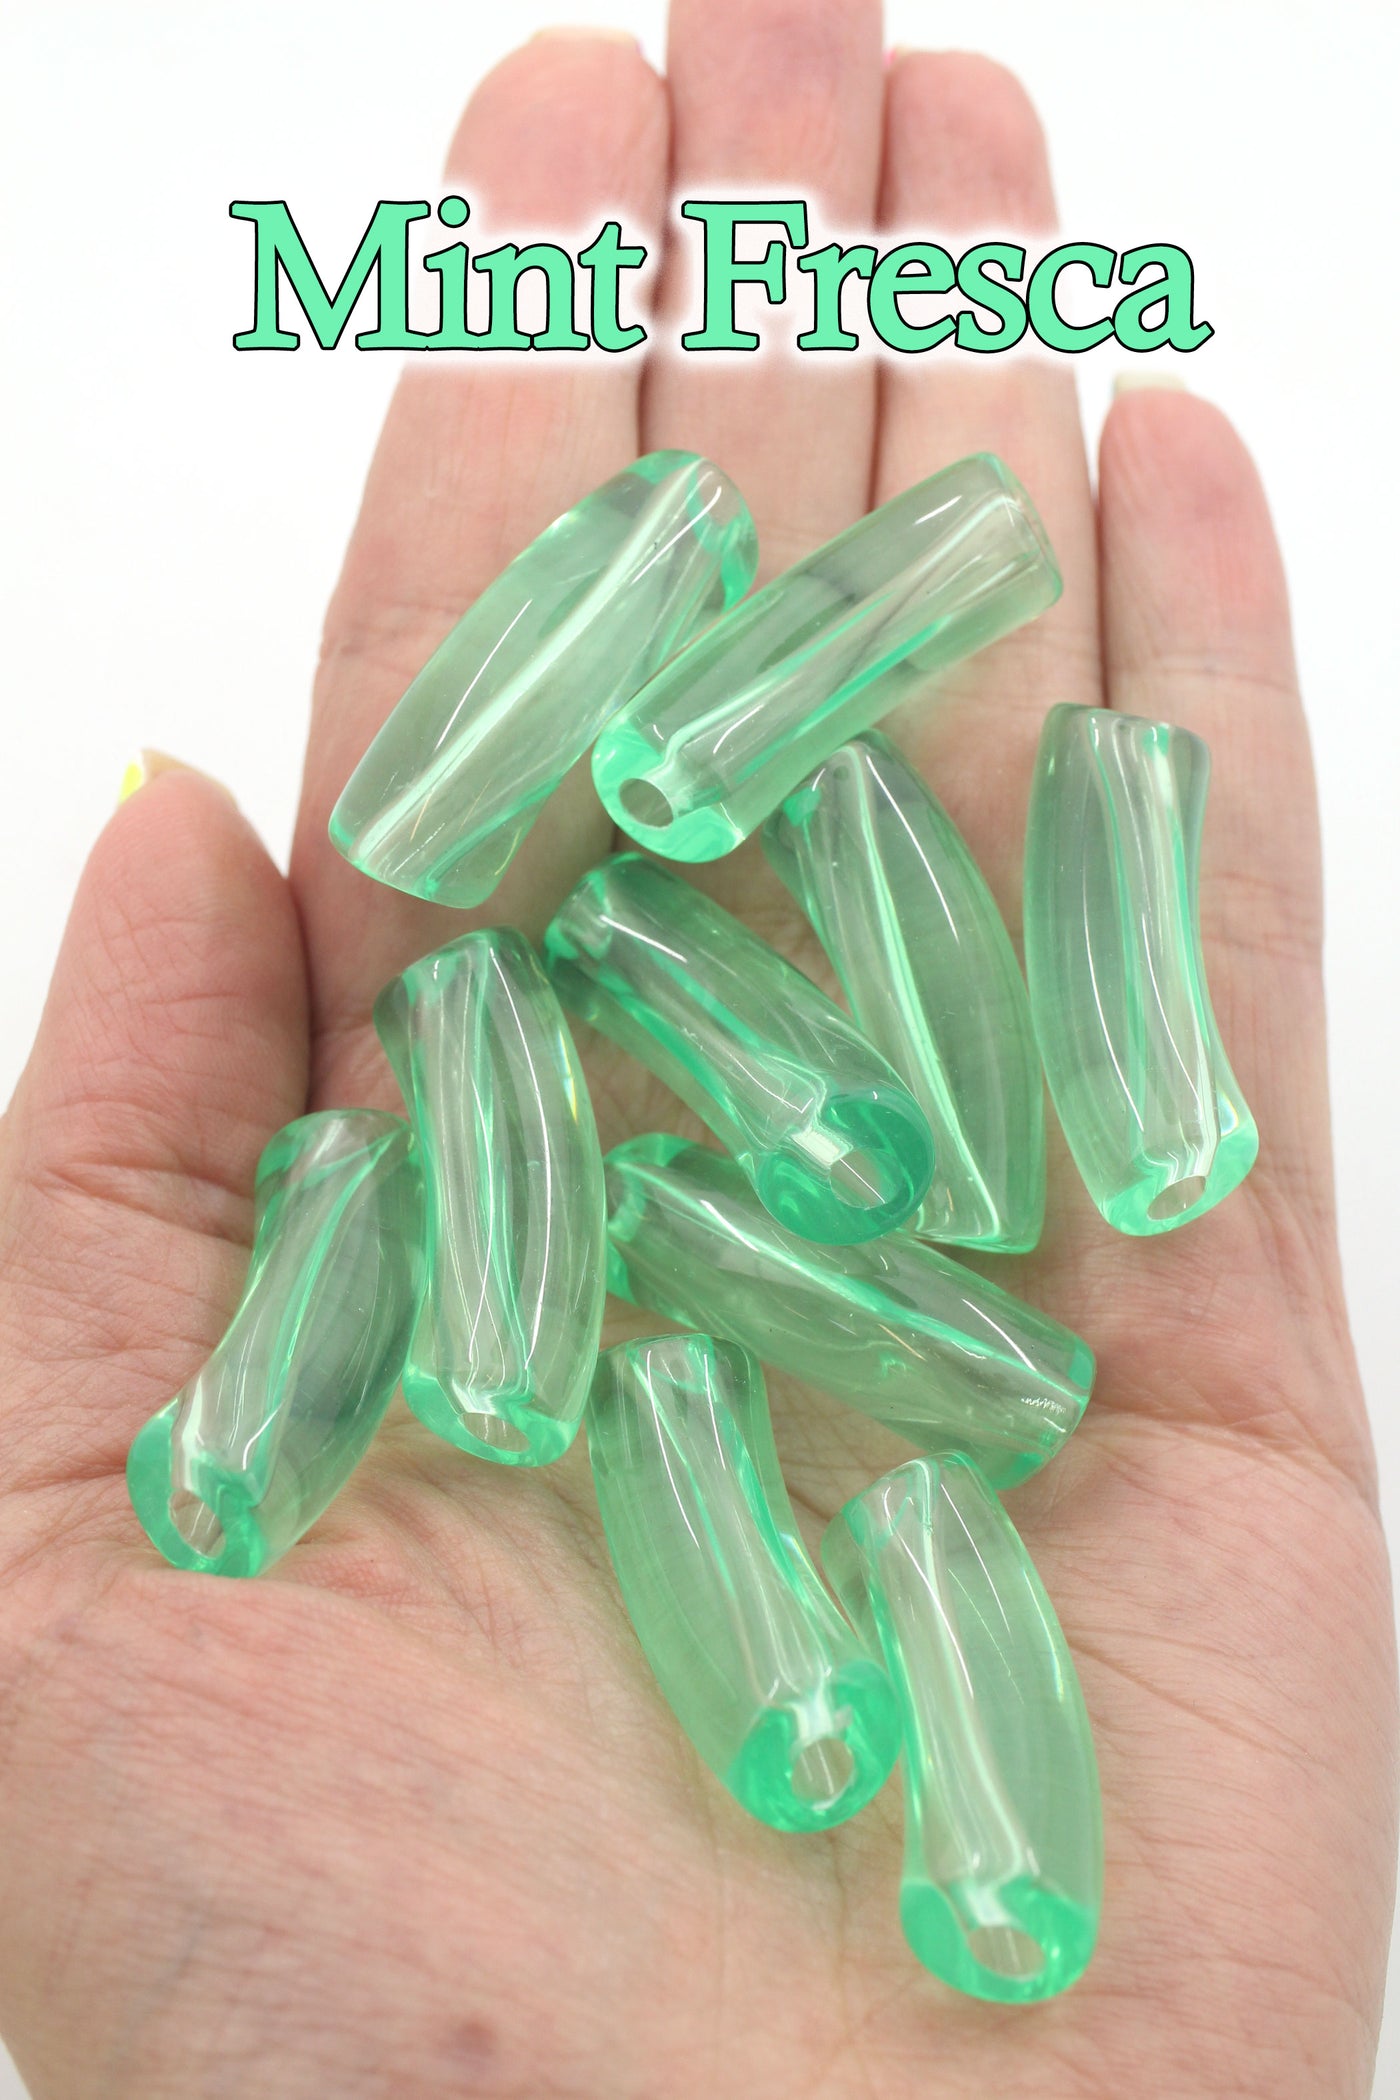 Buy Shop Azalea 4mm Glass Beads Crystal Solo Bancut Accessory Parts Beads  Accessory Beads Accessory Handmade Beads Handicraft Clear from Japan - Buy  authentic Plus exclusive items from Japan